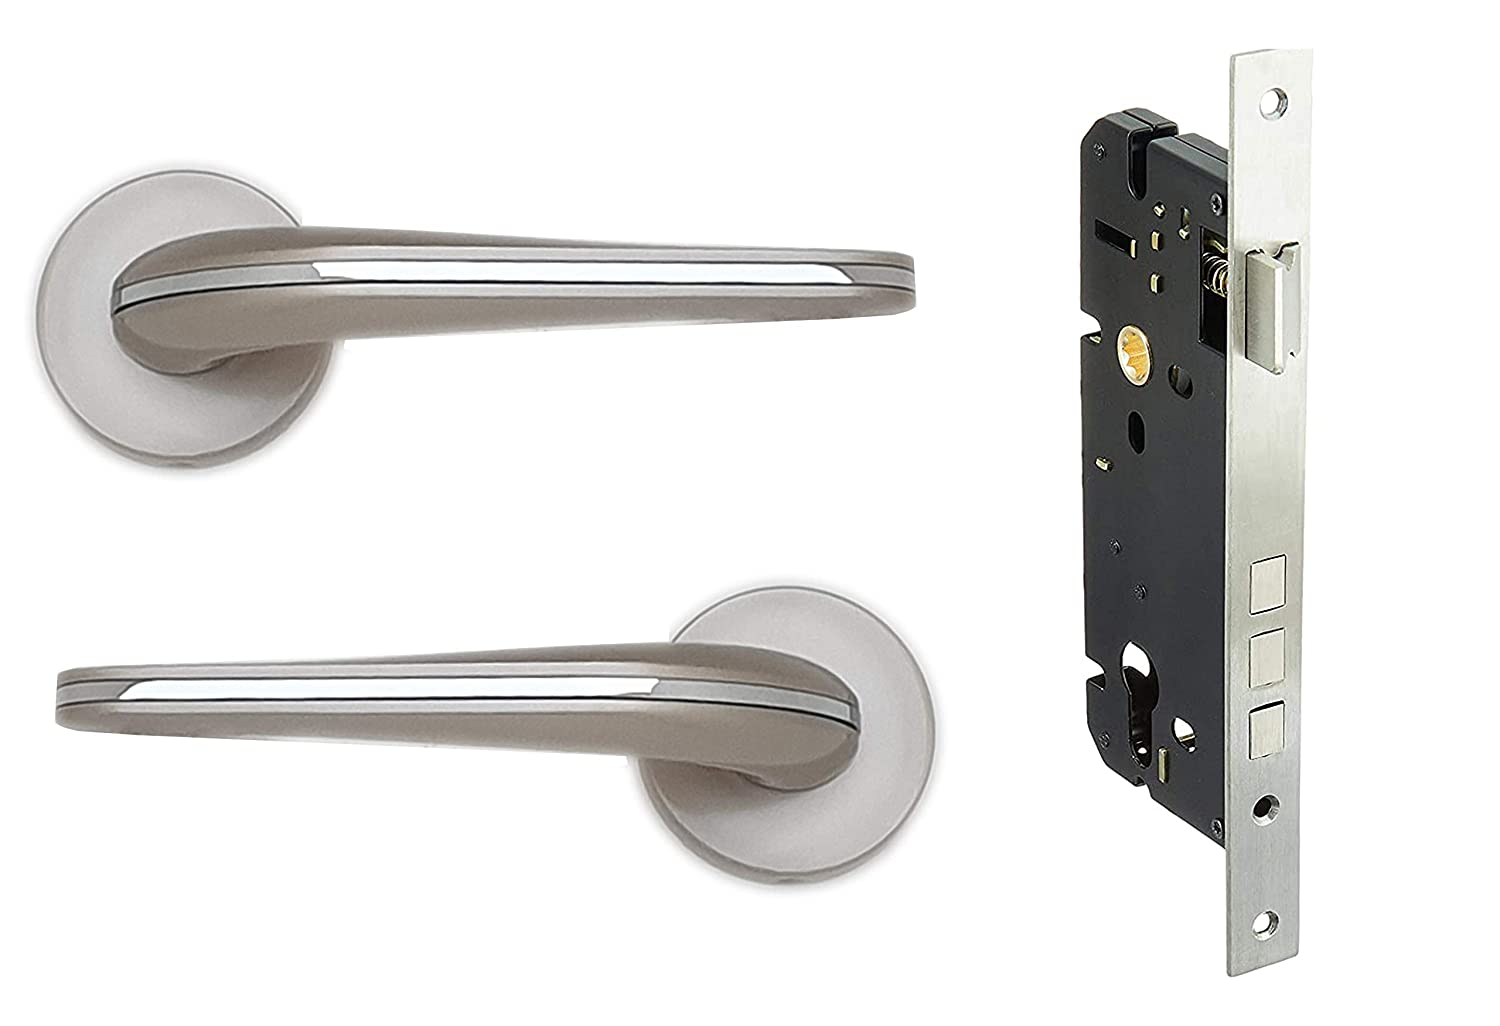 Aquieen MH-502 Malleable Mortise Handle Set (Chrome)